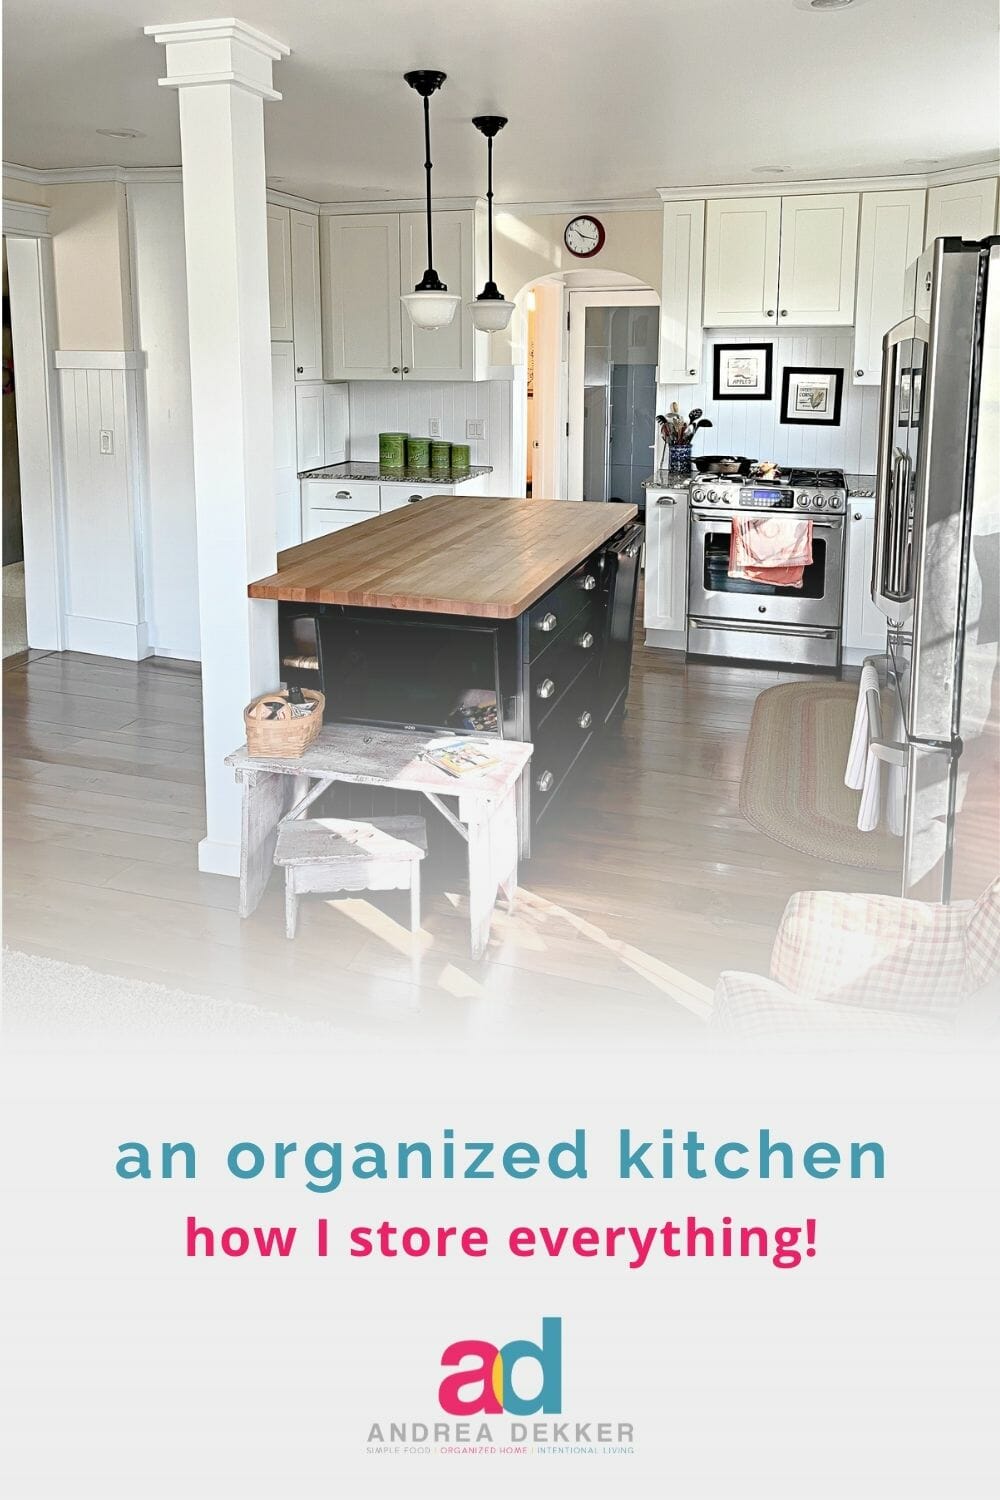 Take a tour of our farmhouse kitchen -- every cabinet and drawer -- and get inspired to tackle your own kitchen organization! via @andreadekker